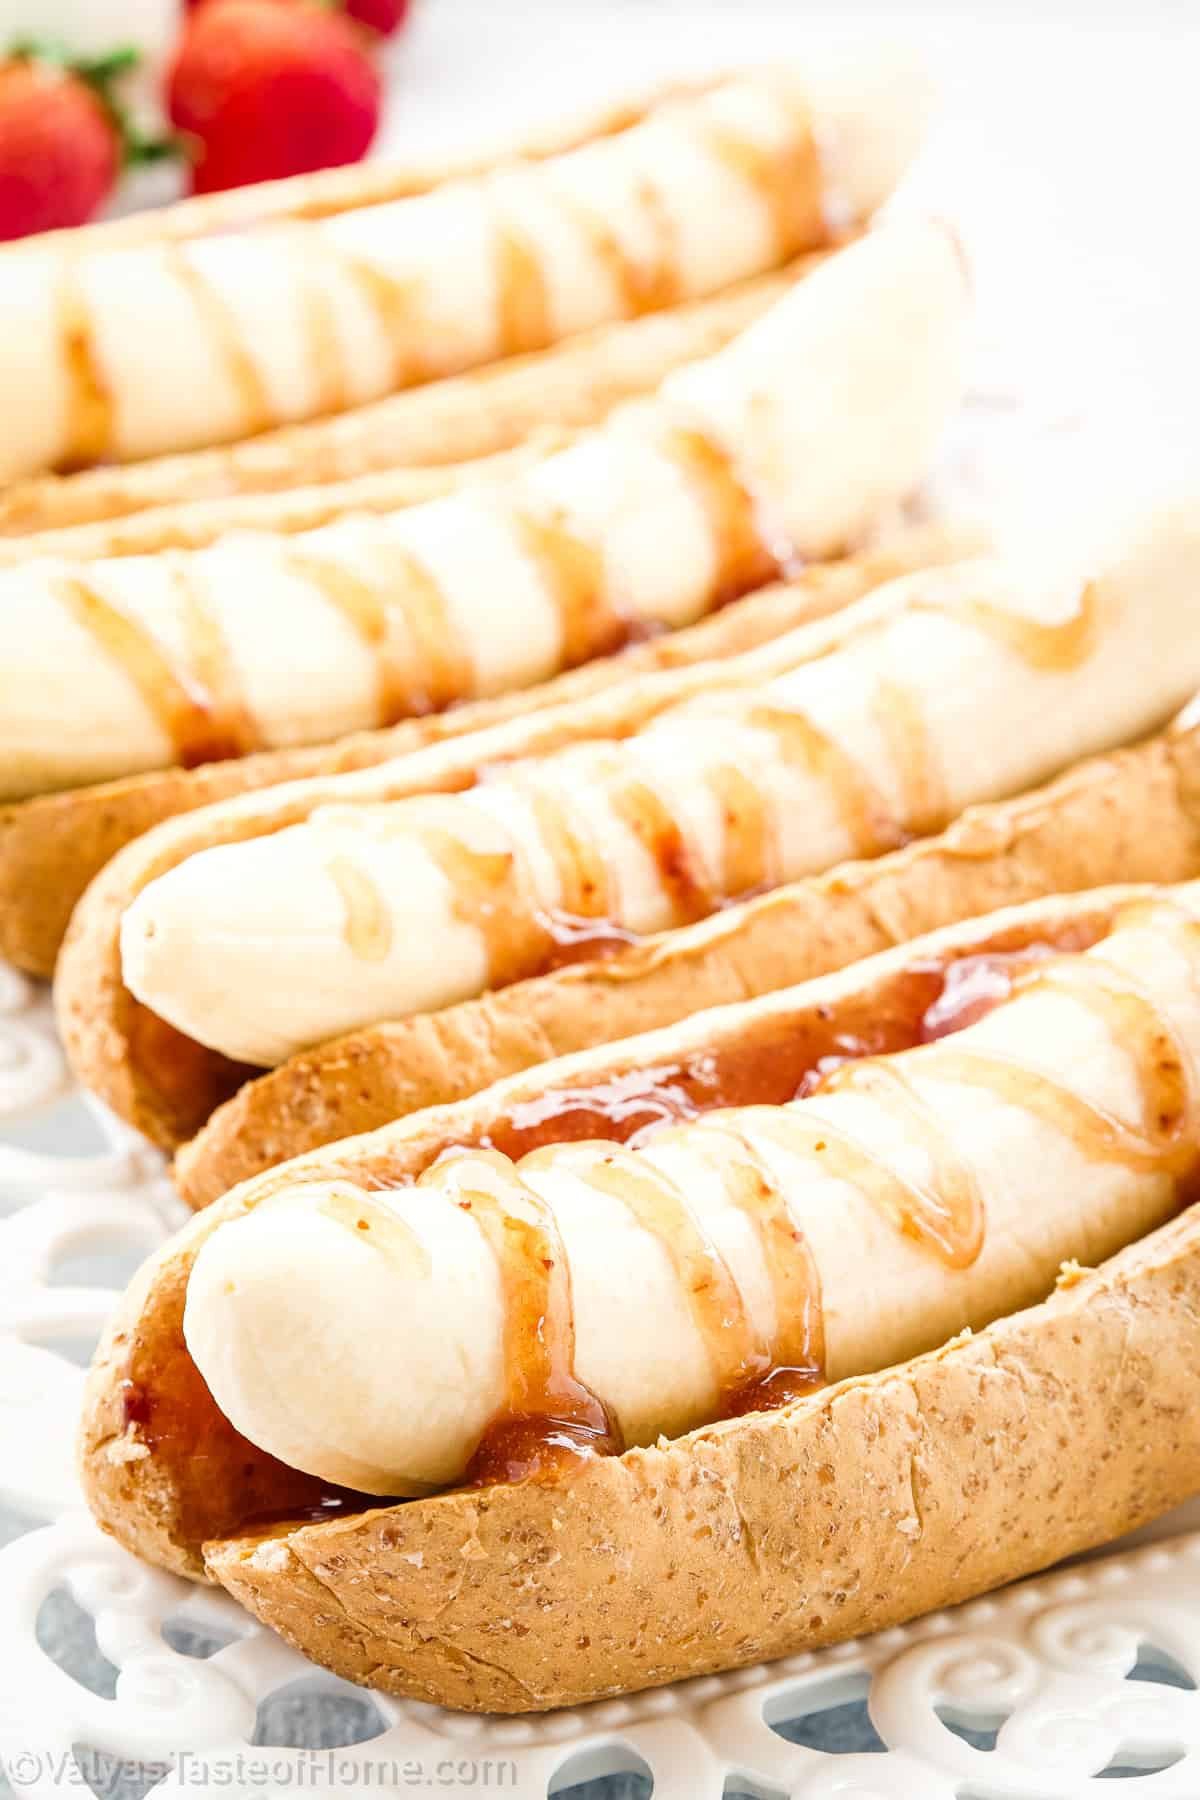 If you're looking for a snack that's as fun to make as it is to eat, our banana hot dog recipe is just the ticket.